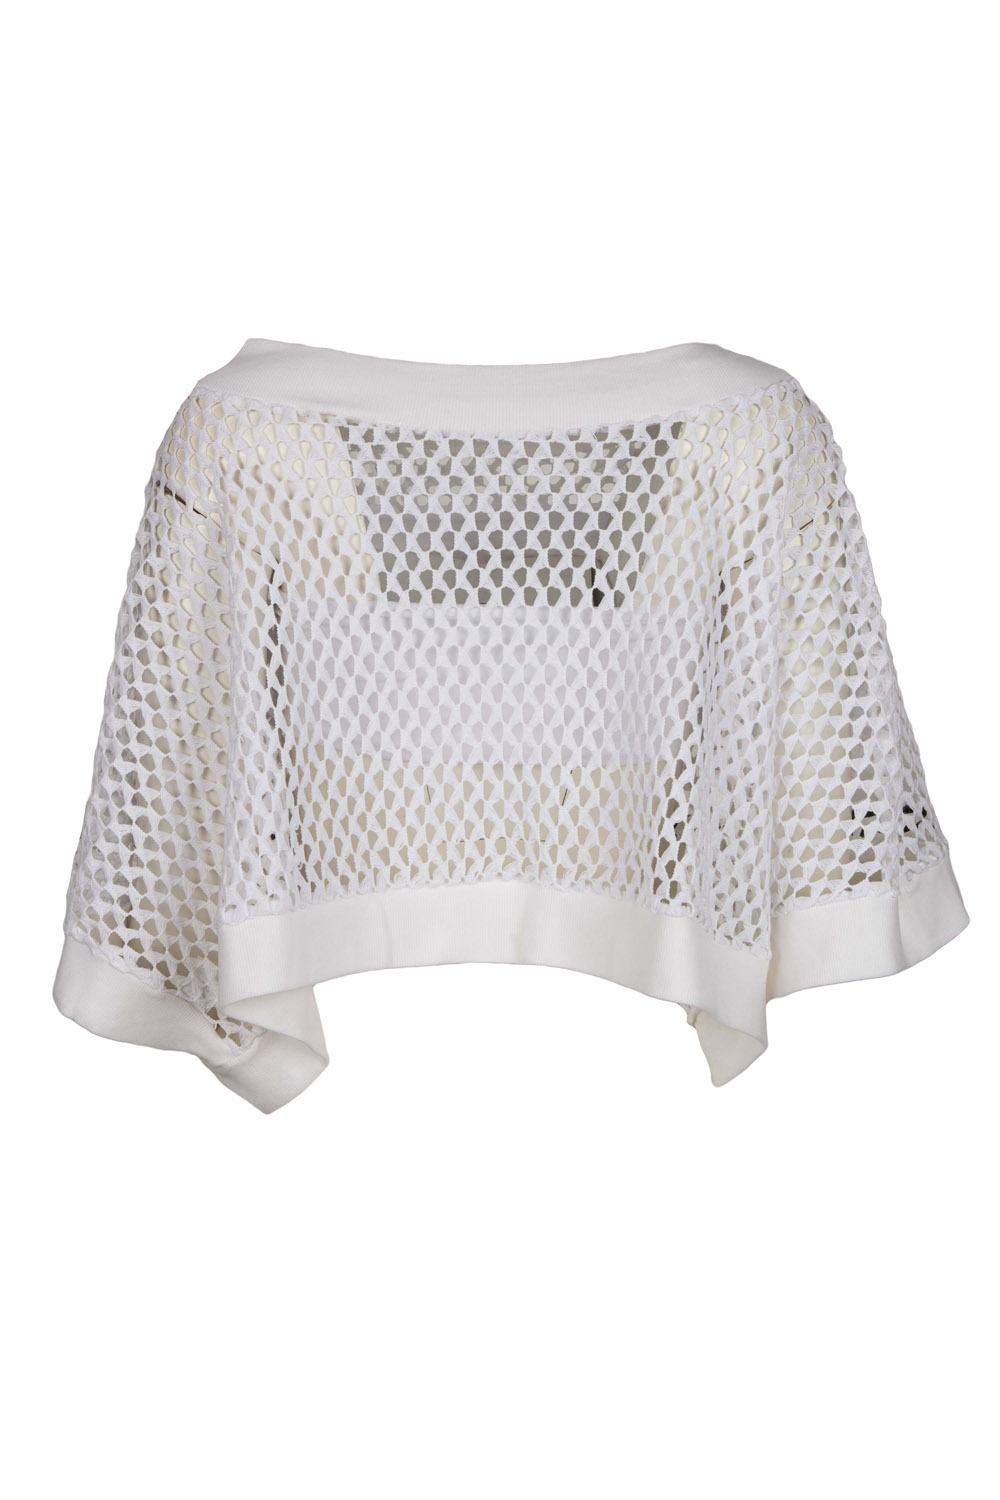 Boxy Perforated Top